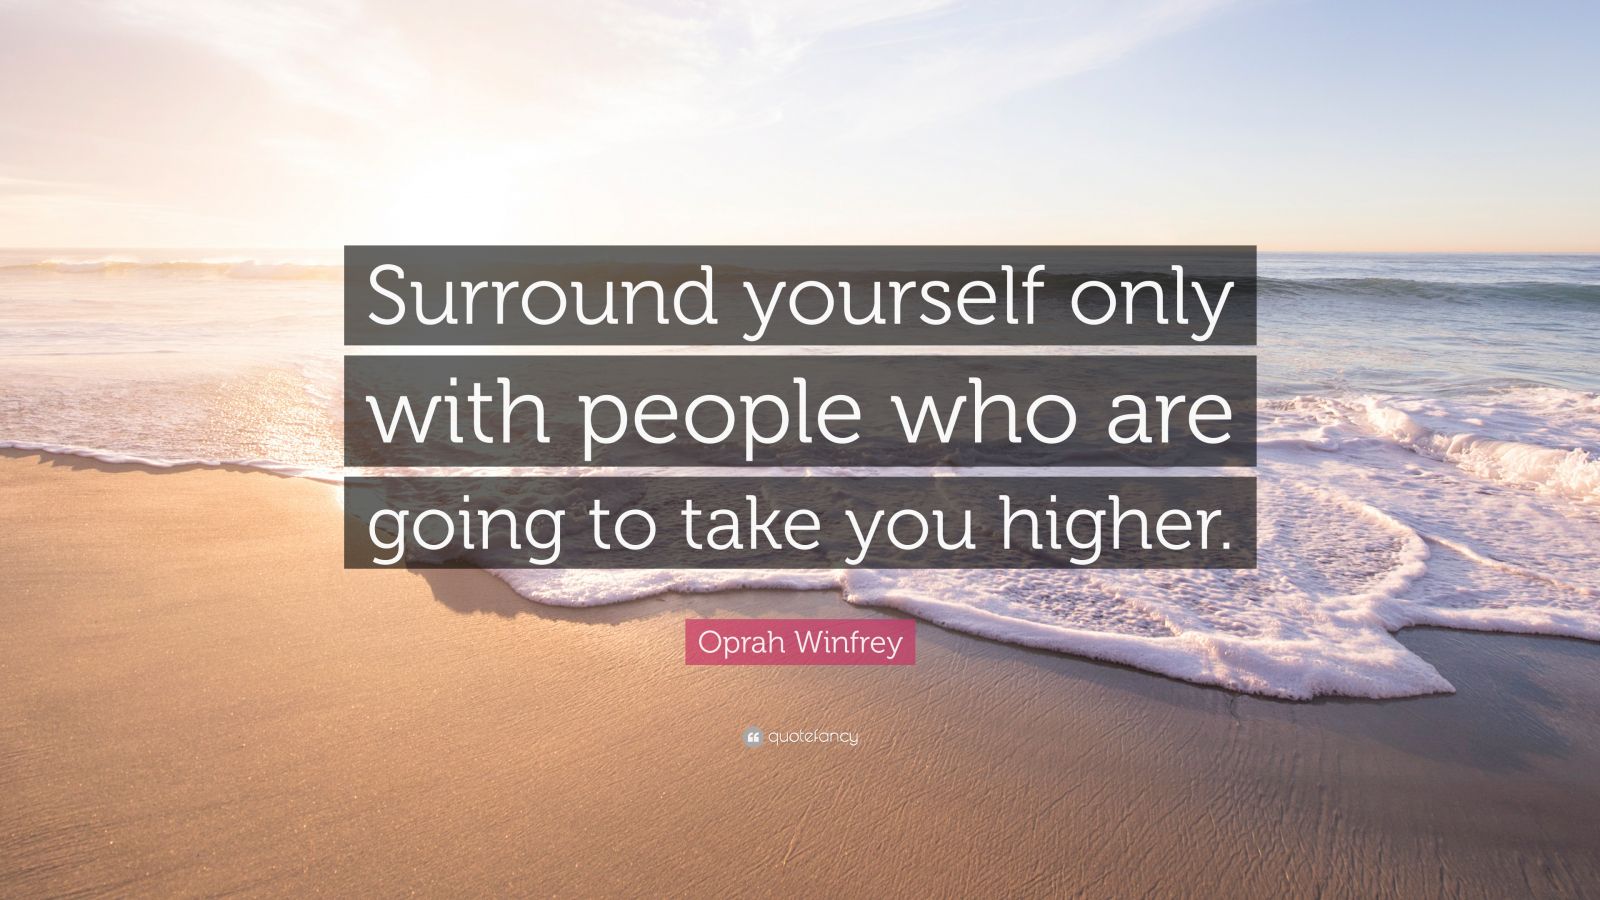 Oprah Winfrey Quote: “Surround yourself only with people who are going